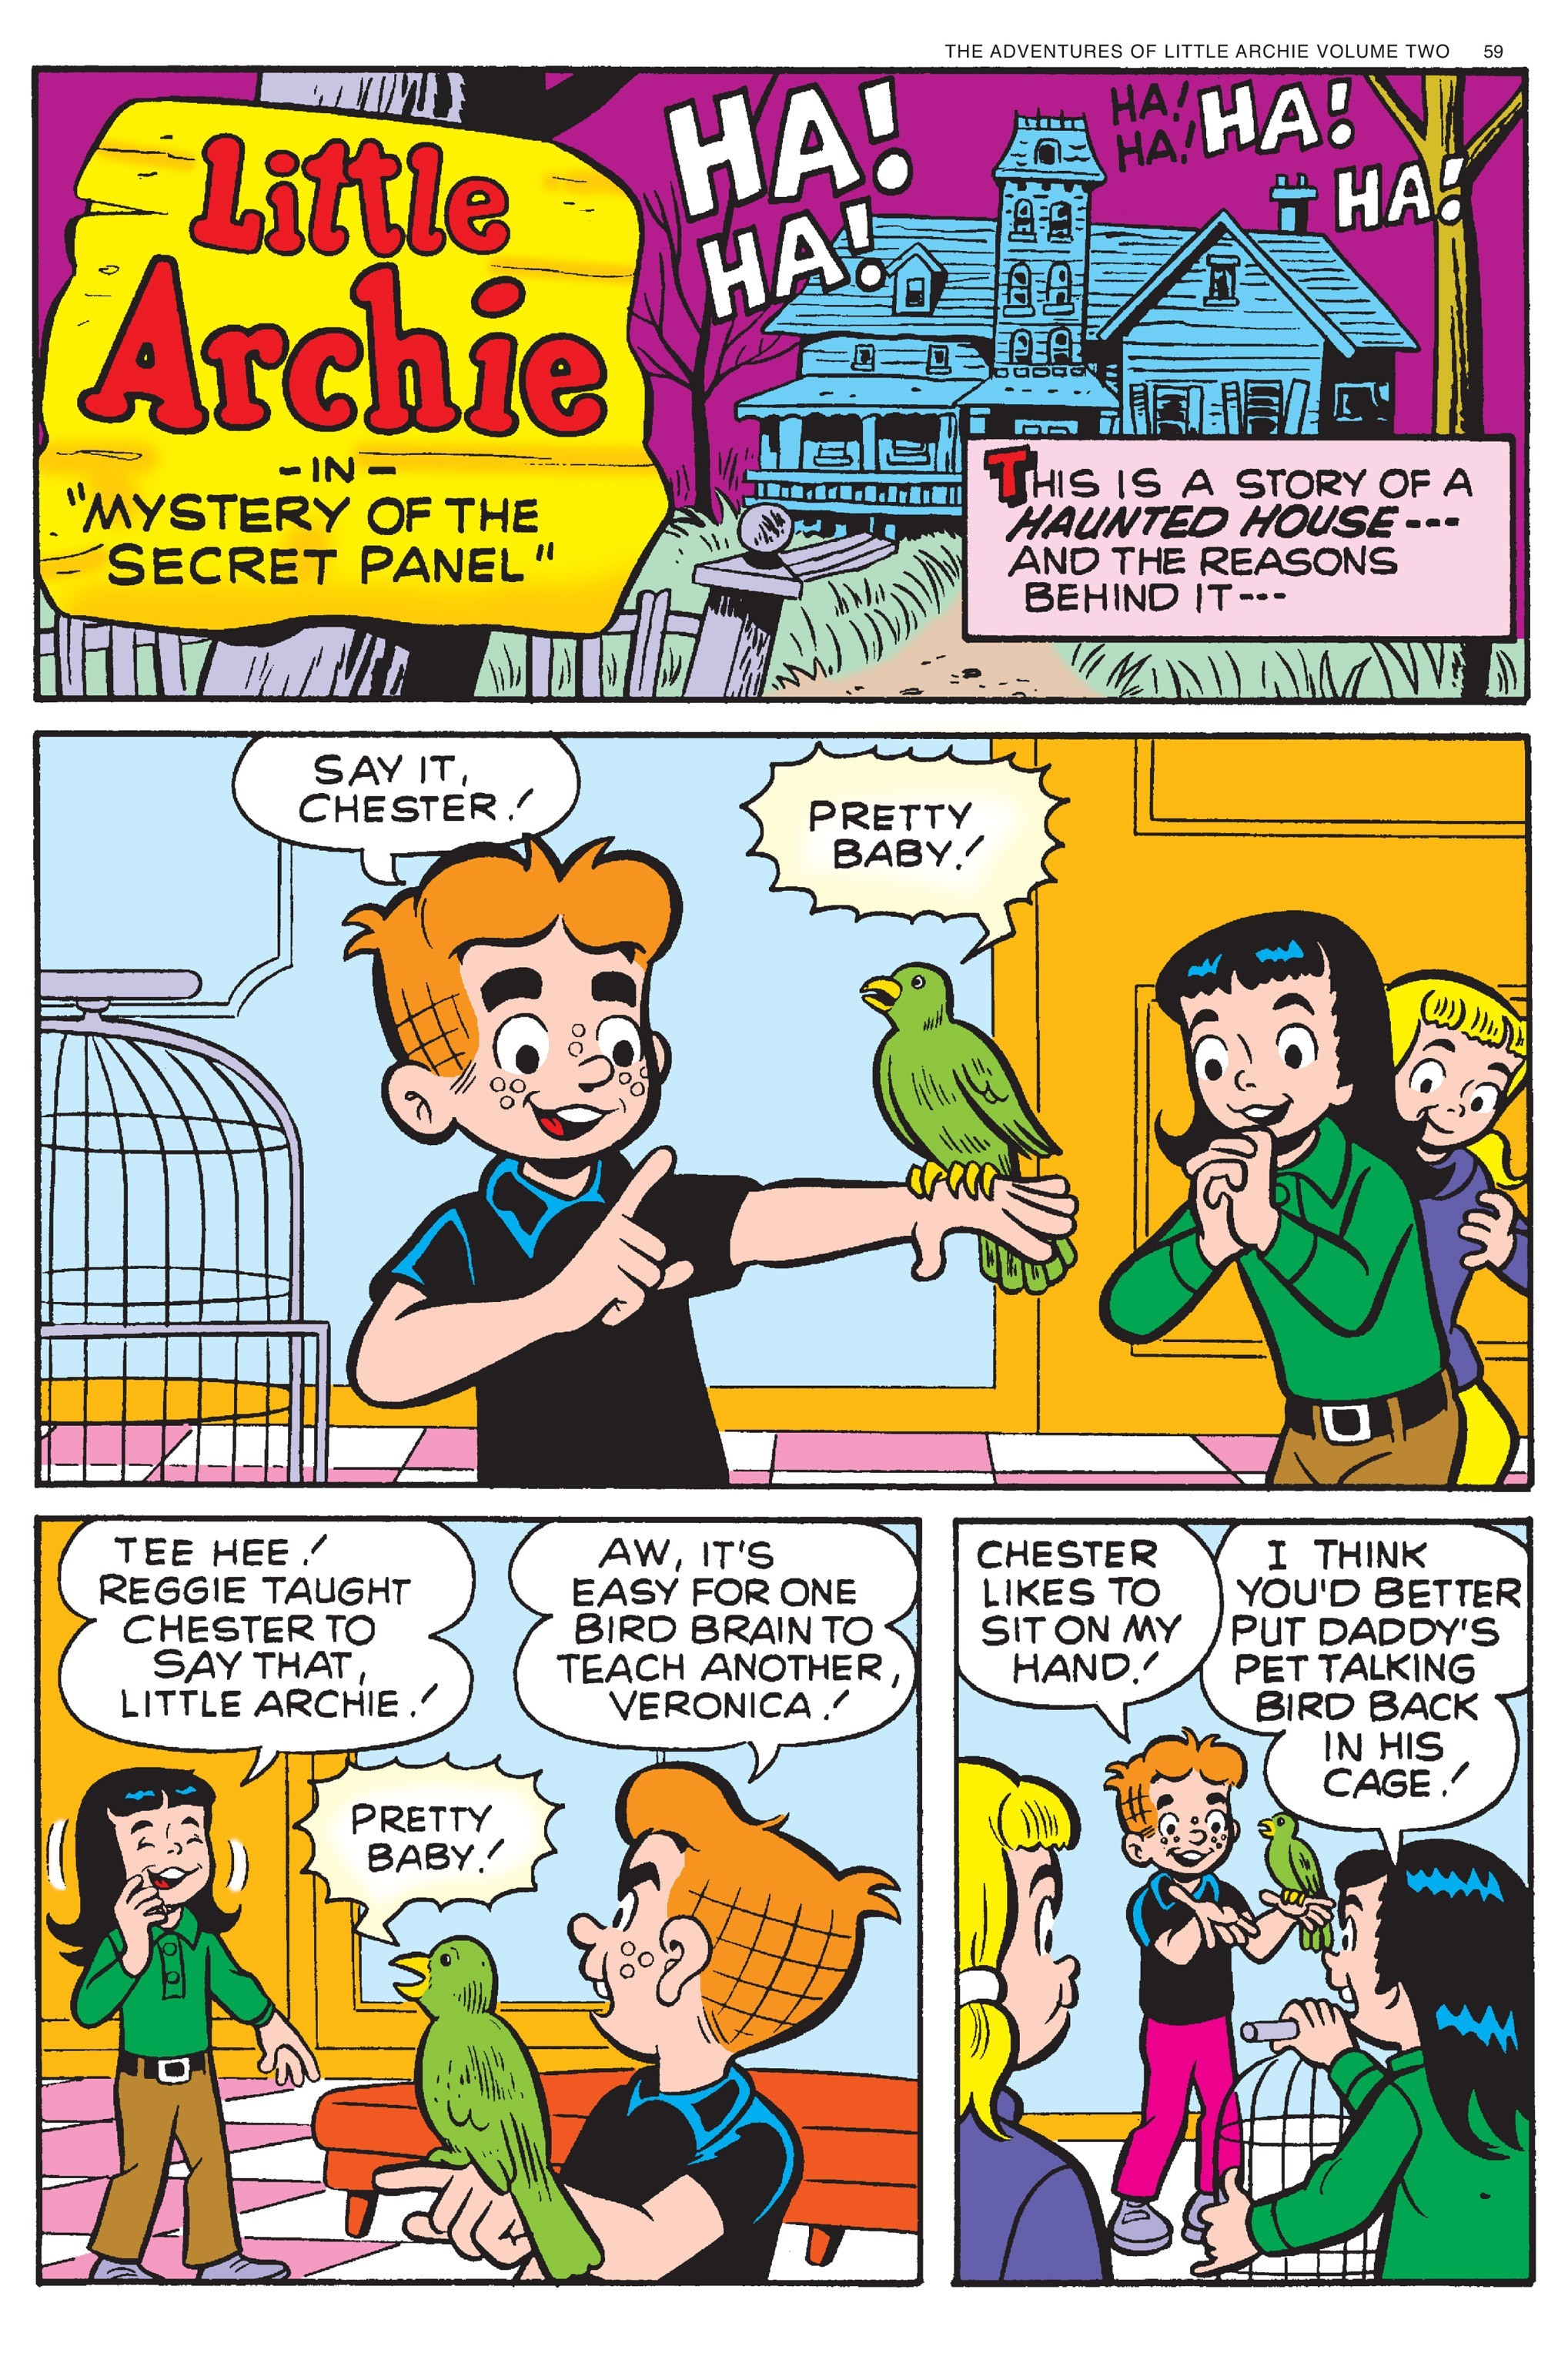 Read online Adventures of Little Archie comic -  Issue # TPB 2 - 60